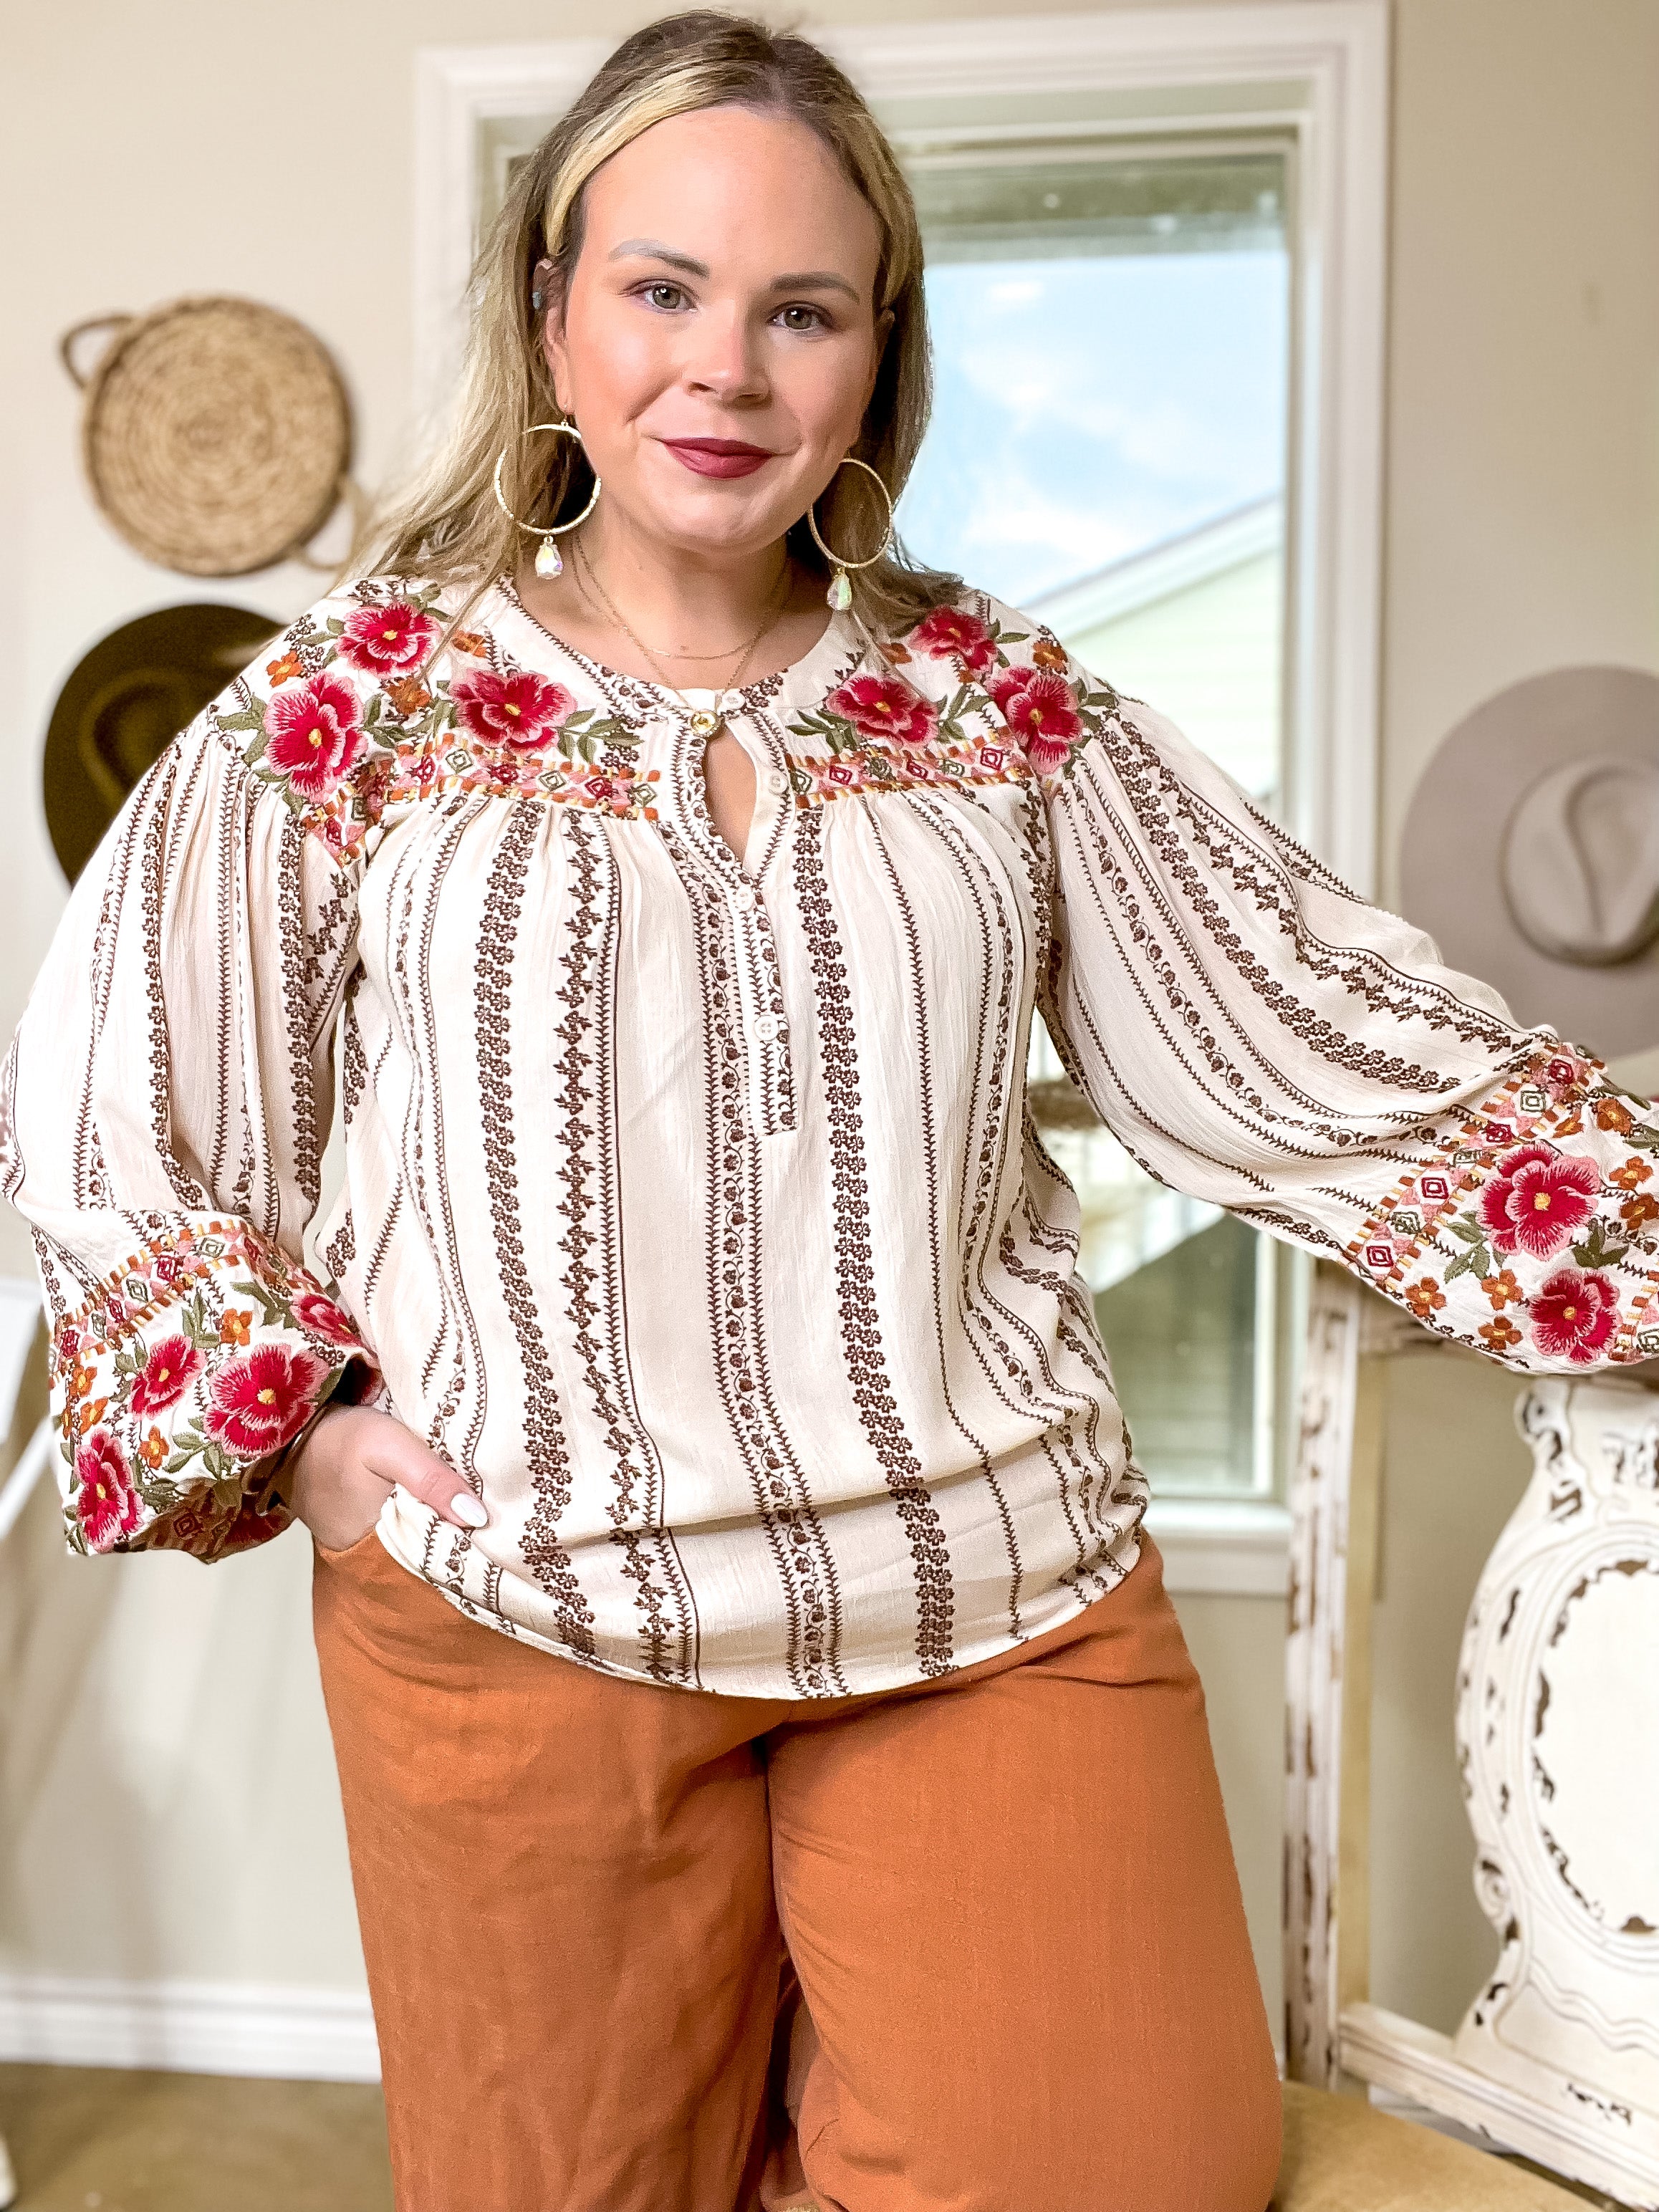 Savanna Jane | New Trails Long Sleeve Tribal Print Floral Embroidered Top in Cream - Giddy Up Glamour Boutique